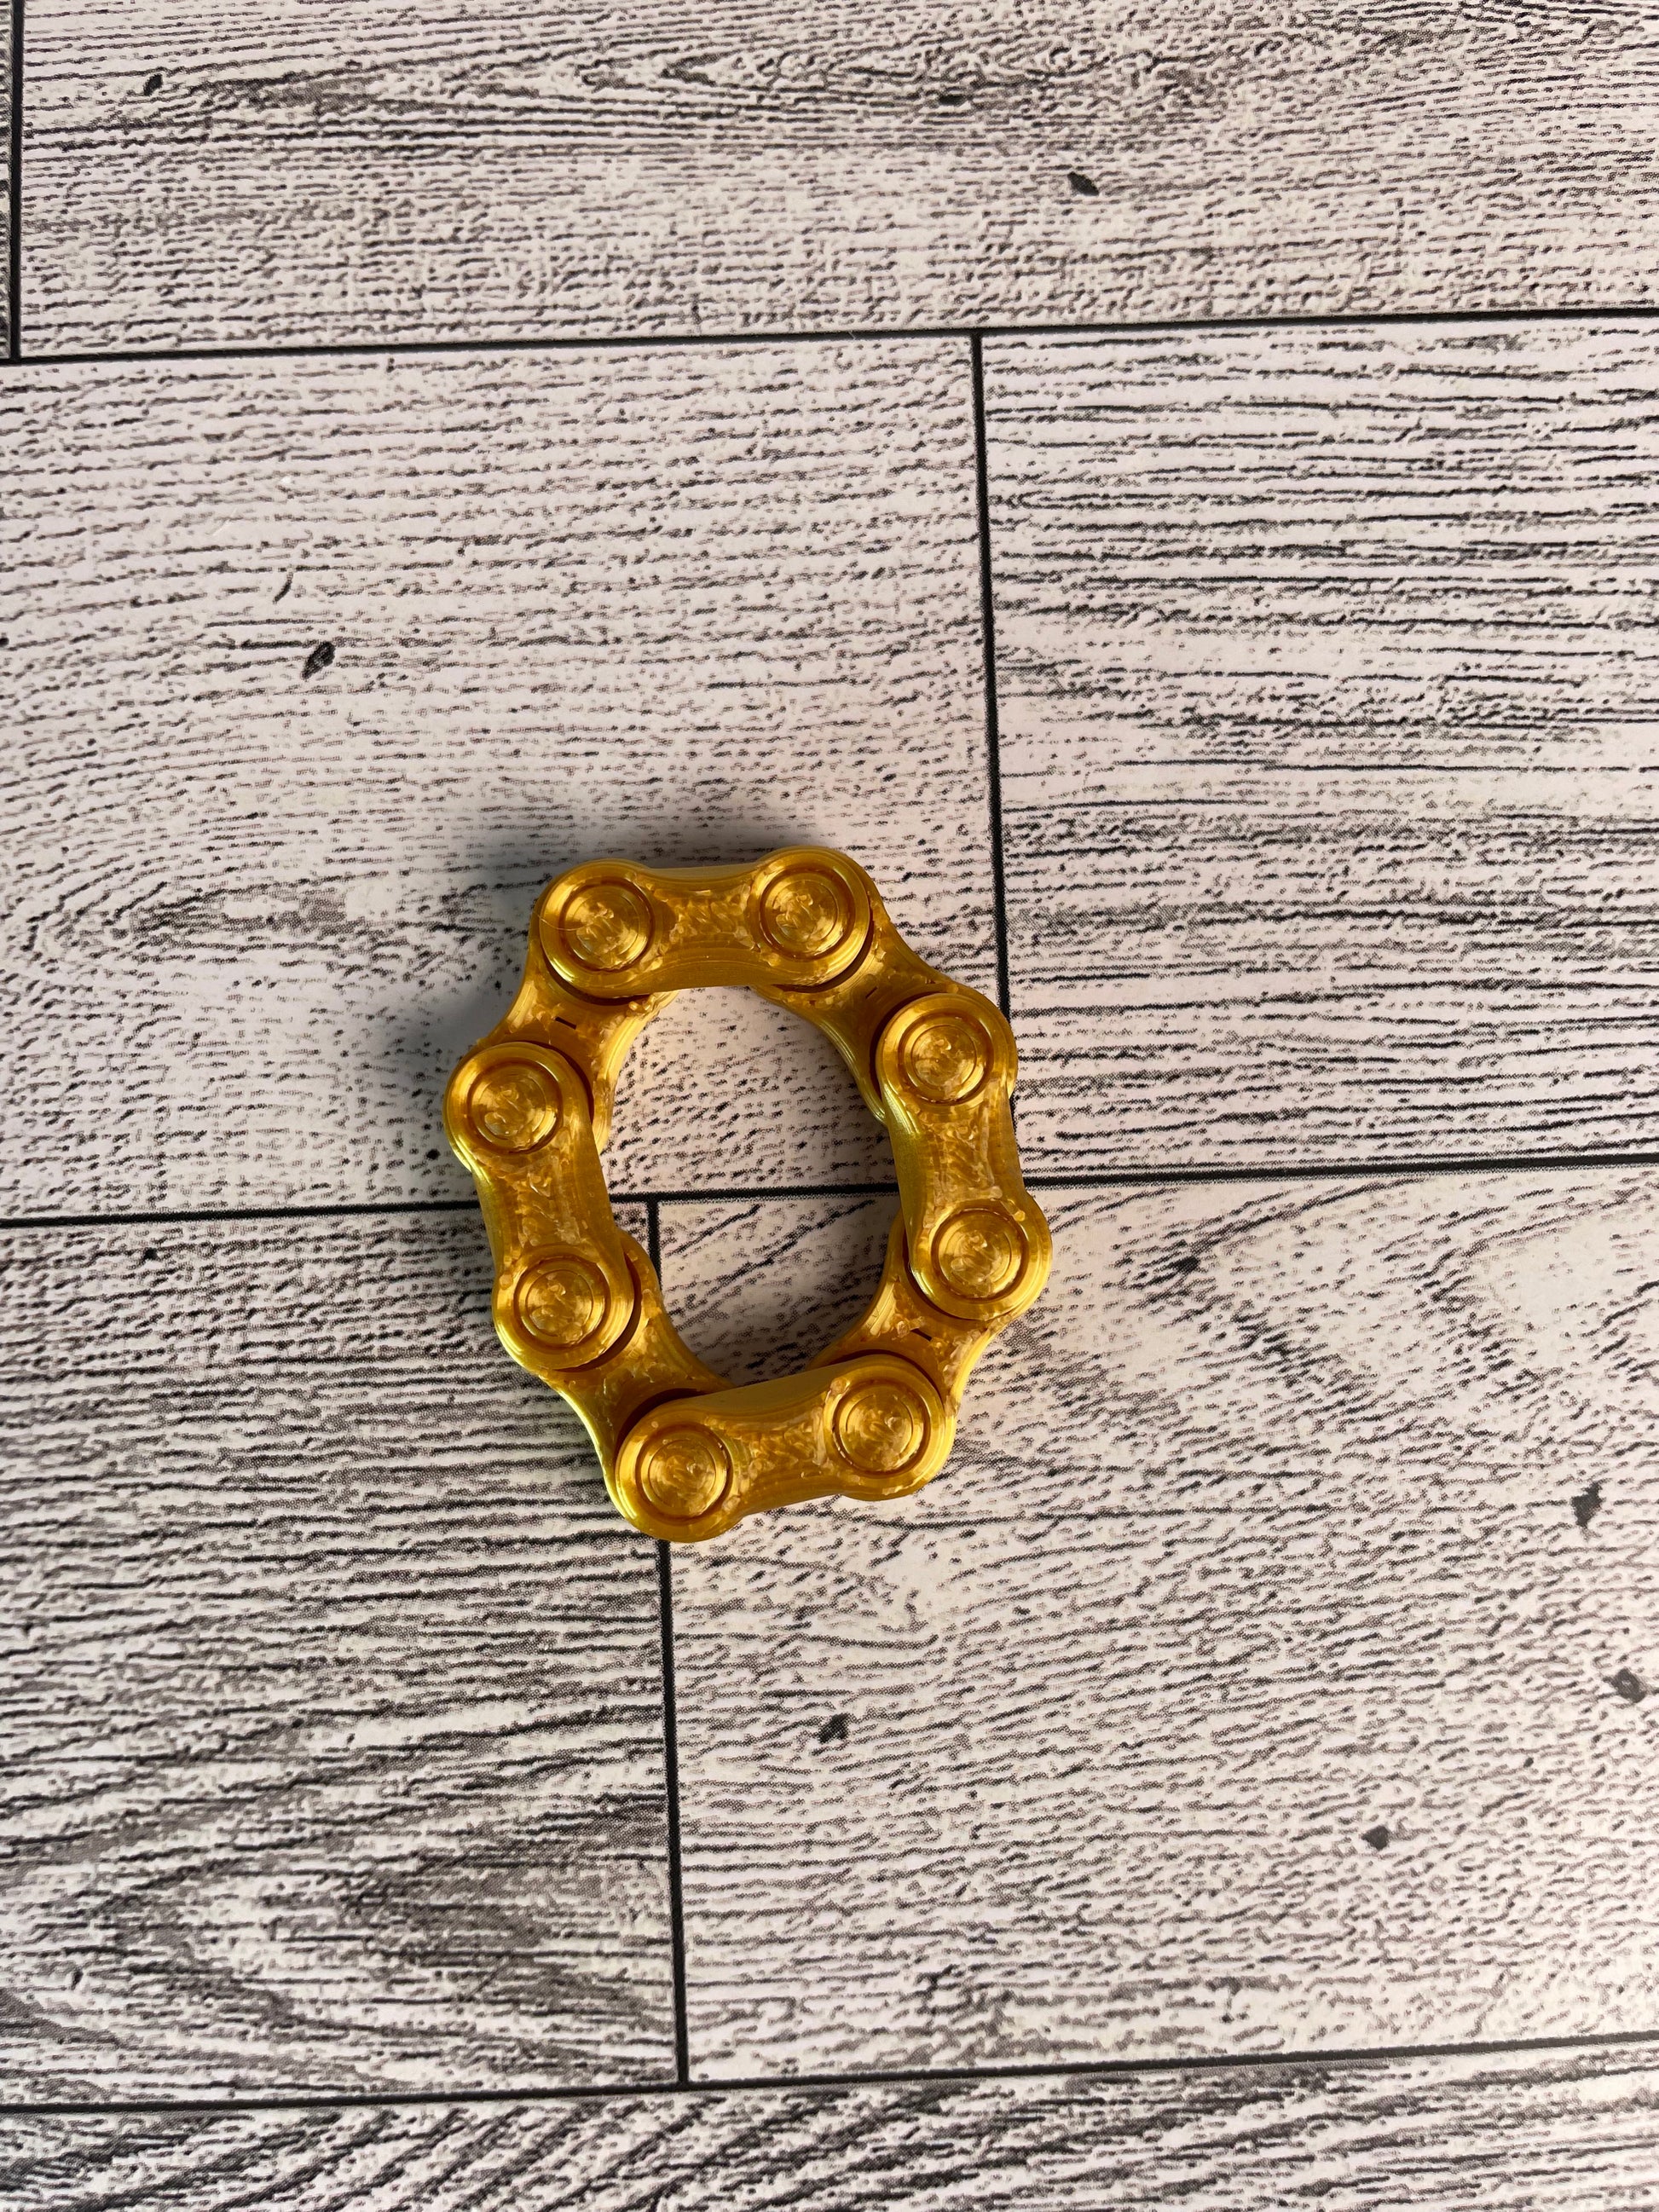 A gold chain link on a wood backdrop. The chain is arranged in a circle shape and there are four links